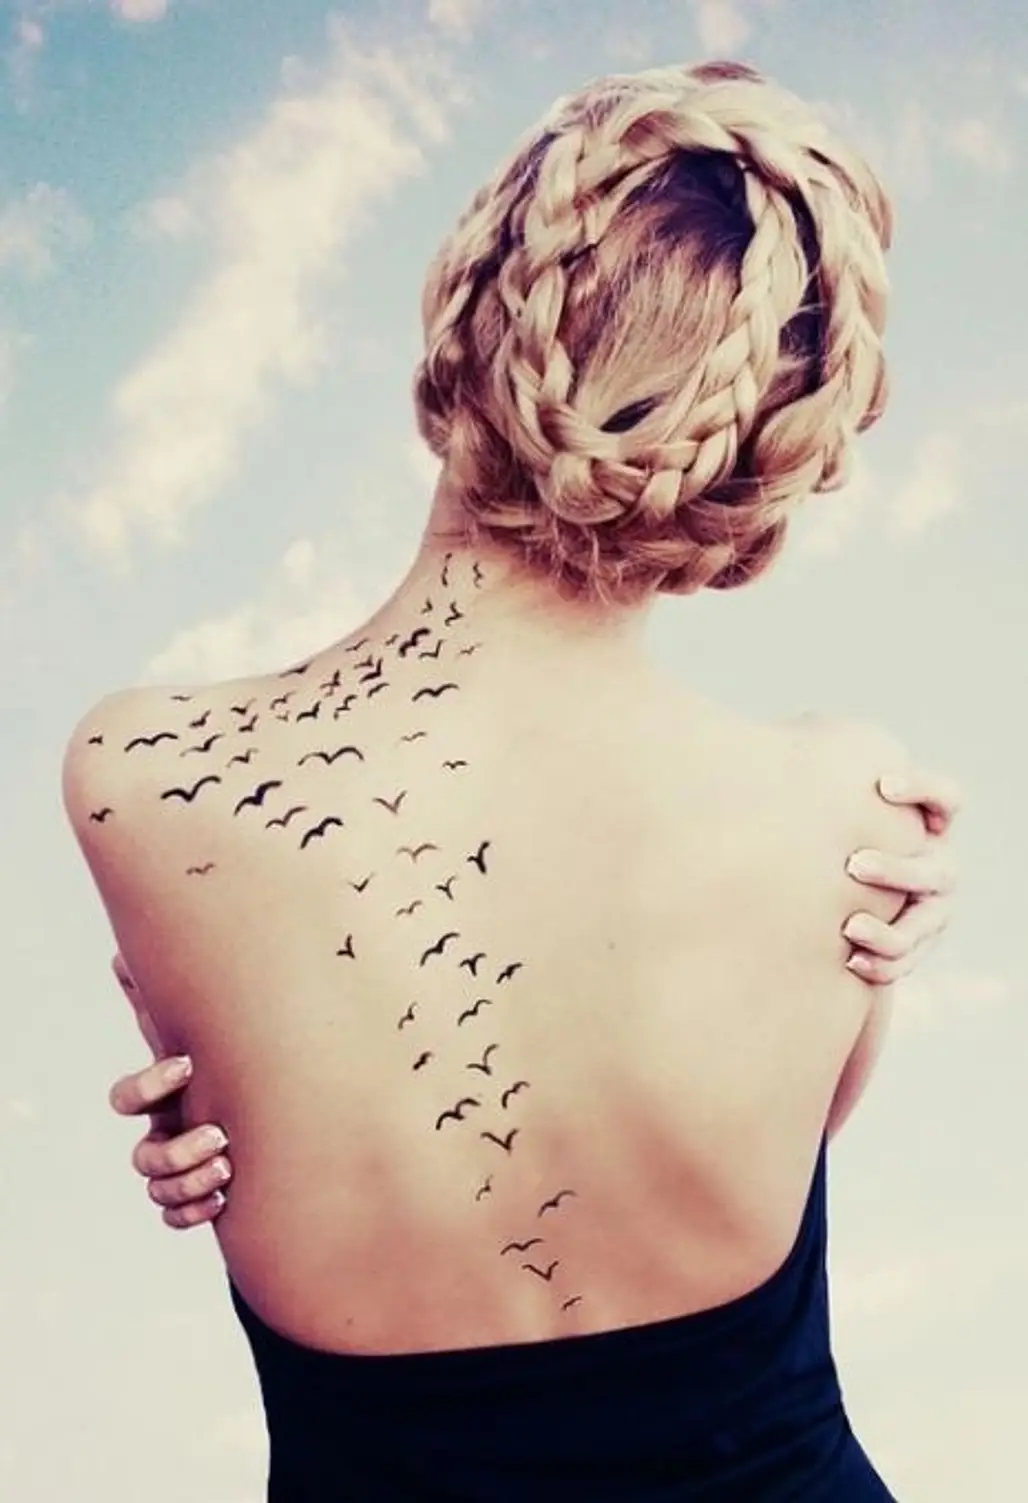 10 Dainty And Minimalist Back Tattoo Designs You Won't Regret | Preview.ph